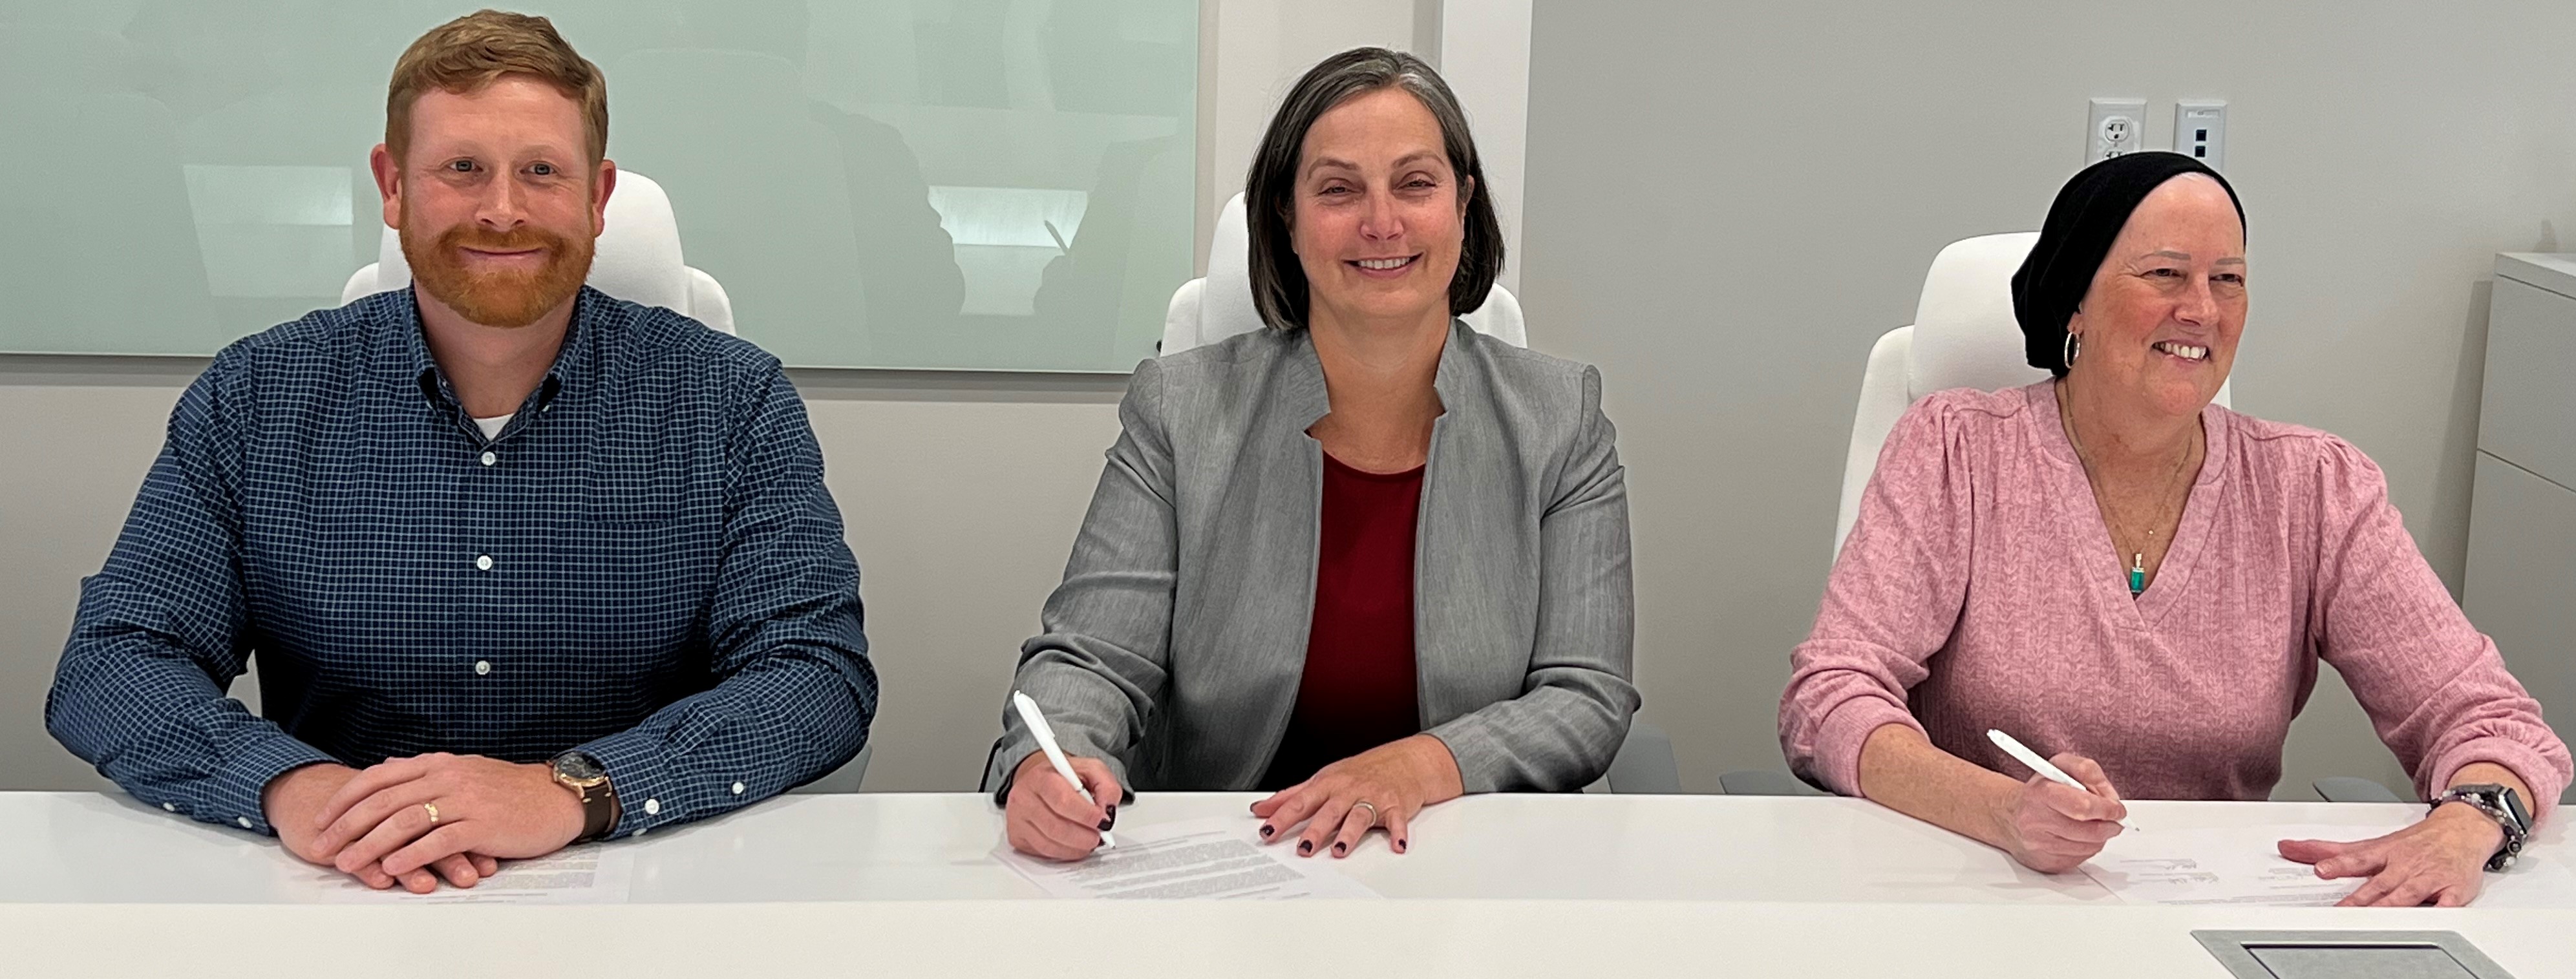 On March 10, 2023, Luminant’s Voluntary Protection Program Coordinator Alexander Miller; OSHA Regional Administrator Jennifer Rous; and Onward Energy’s Corporate Safety Director Kelli Heflin signed an alliance agreement to promote workplace safety and health for people working near high voltage.